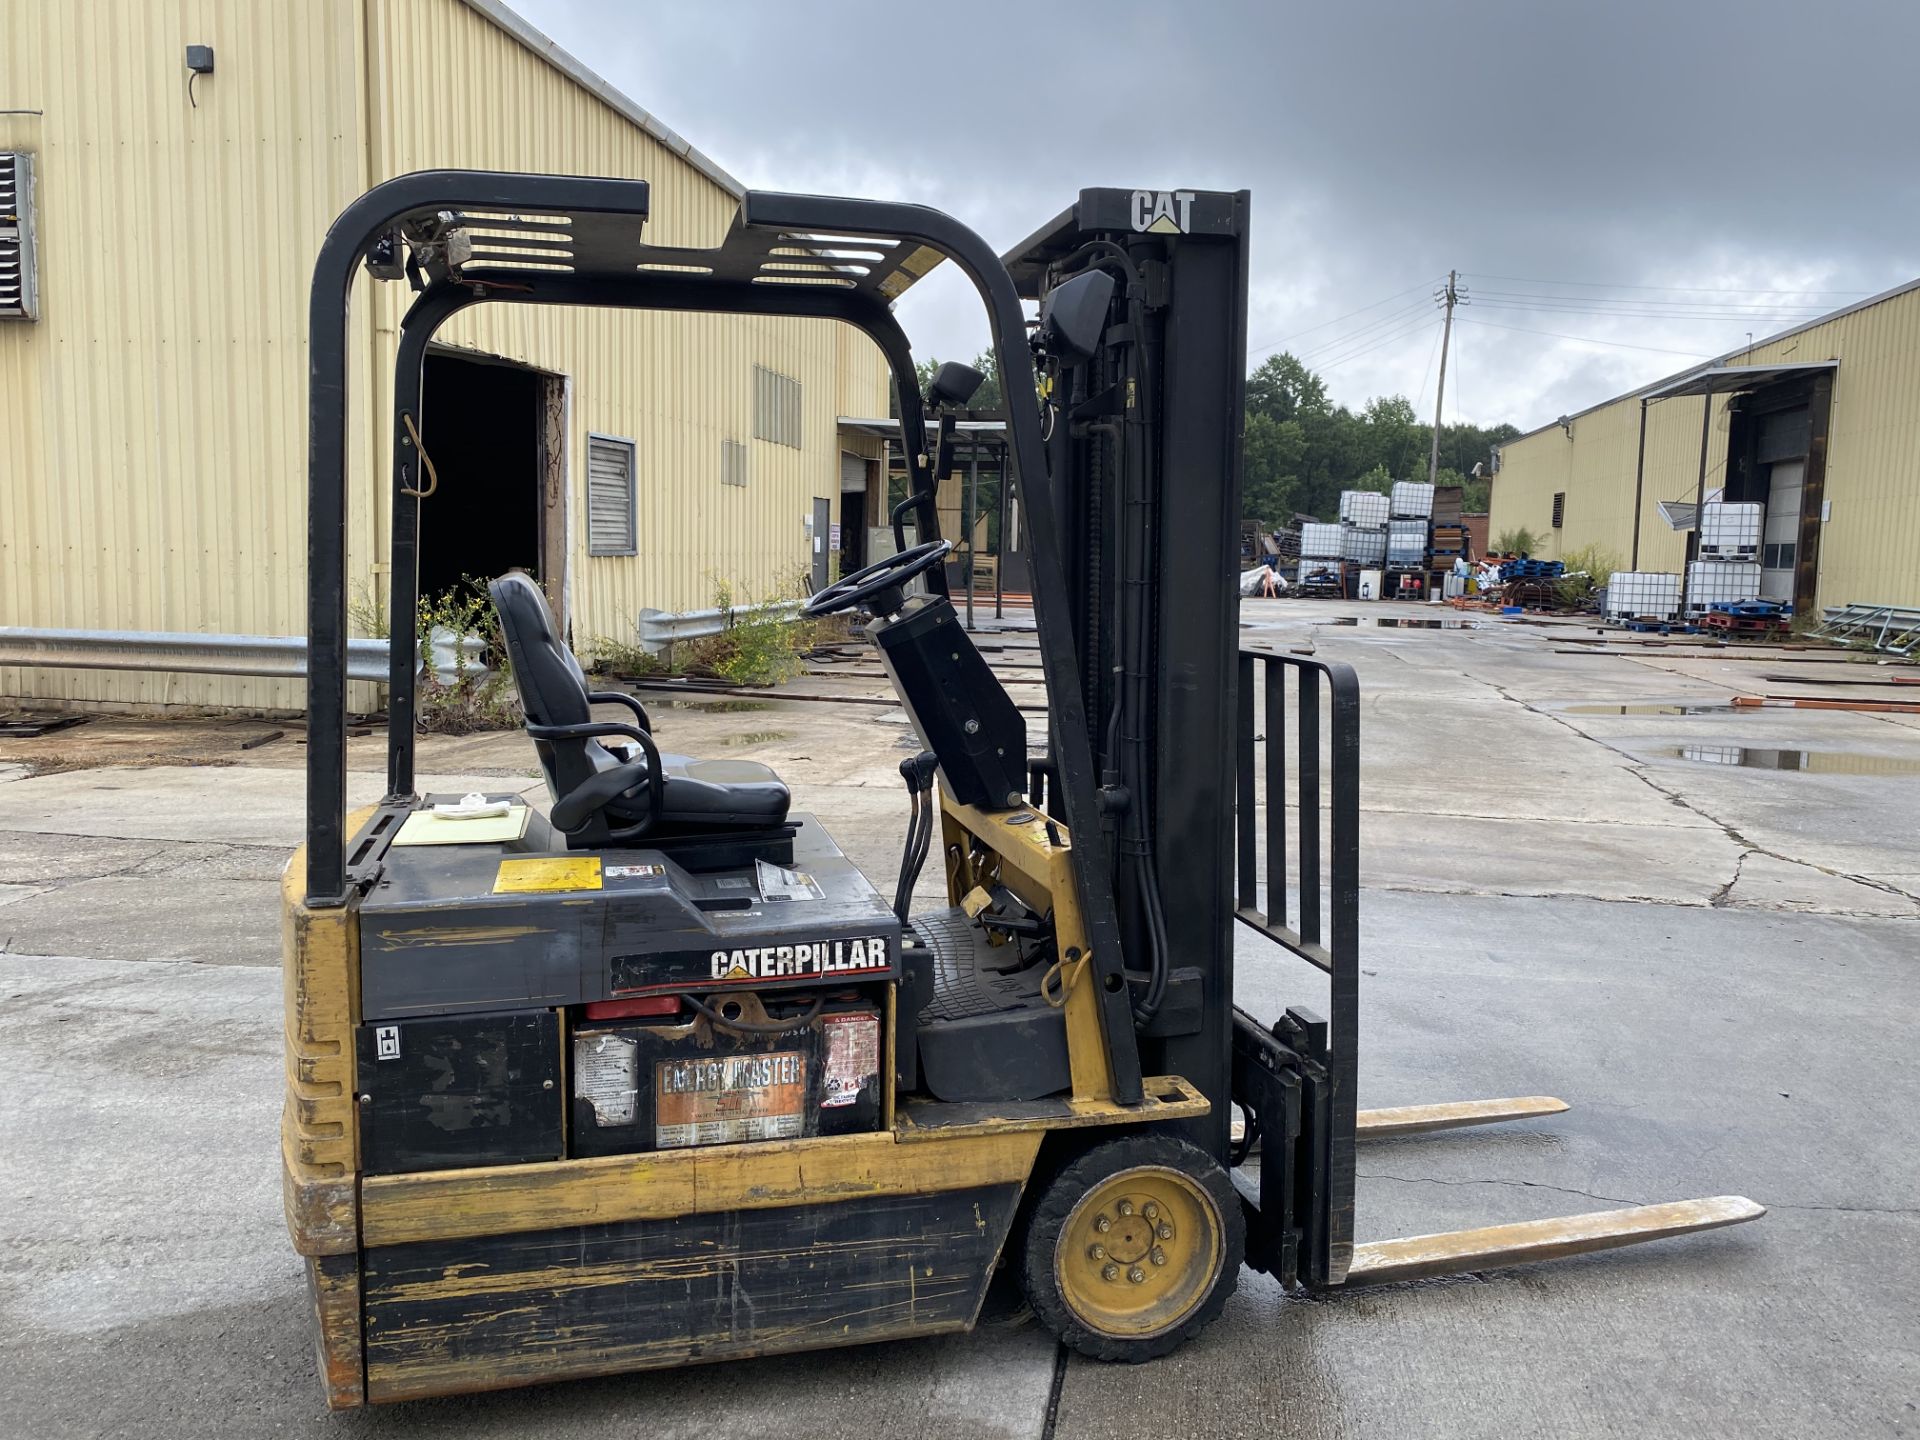 CATERPILLAR 3-WHEEL 3000 LBS CAPACITY ELECTRIC FORKLIFT - Image 3 of 5